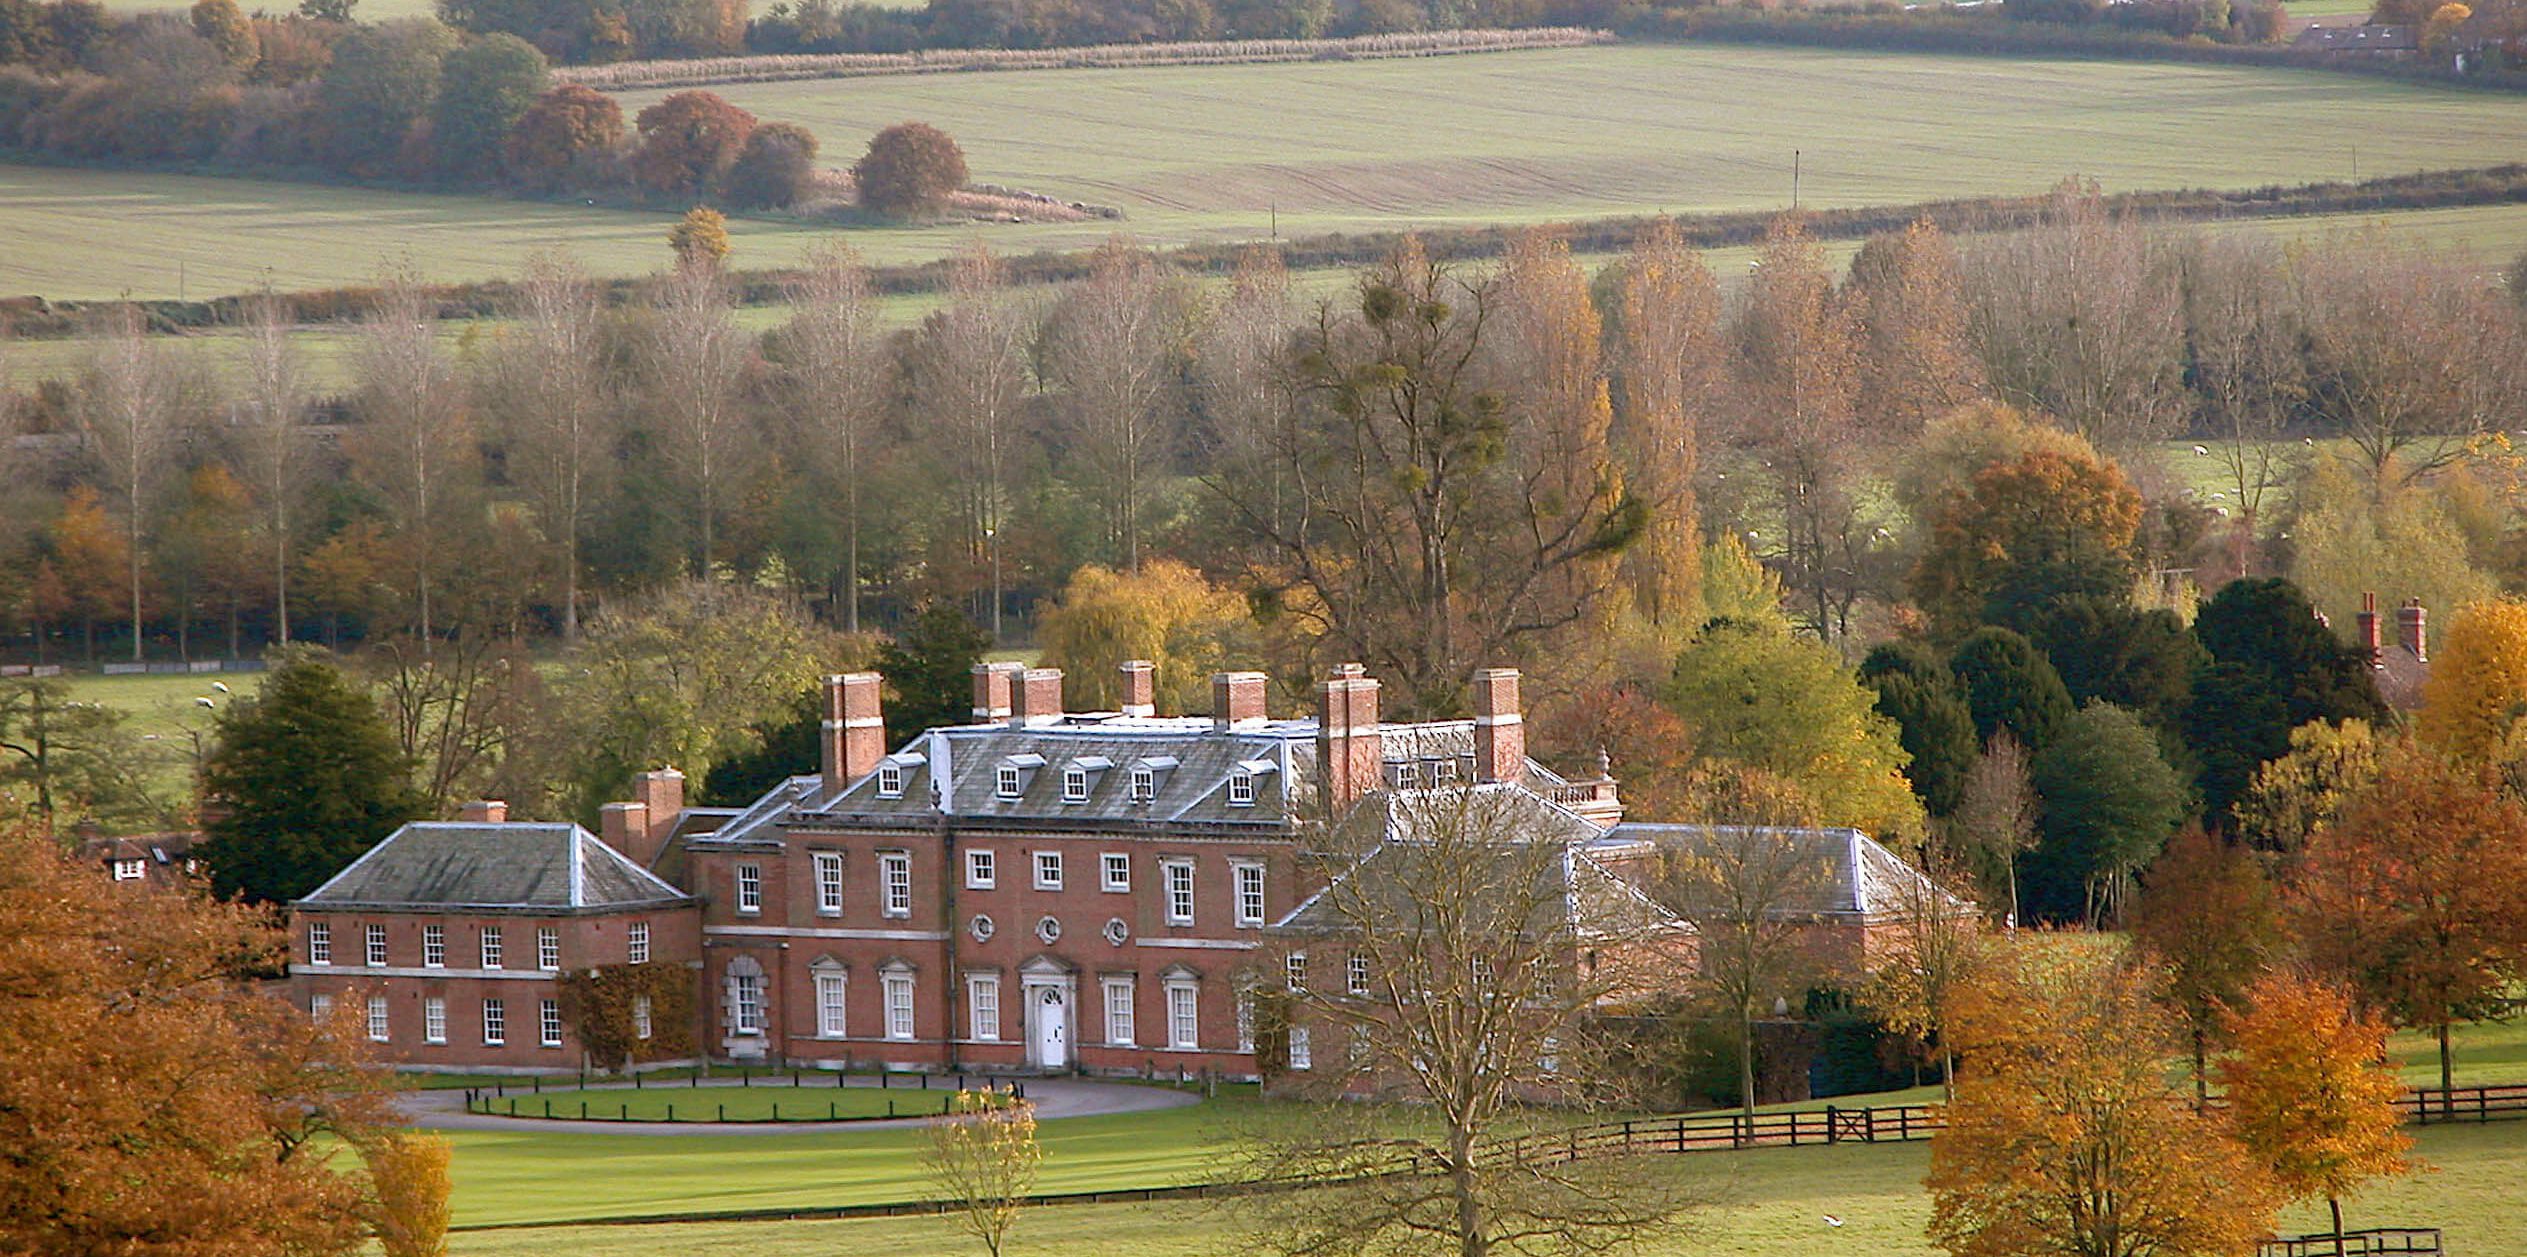 Godmersham House, surrounded by grass fields and trees, in autumn.